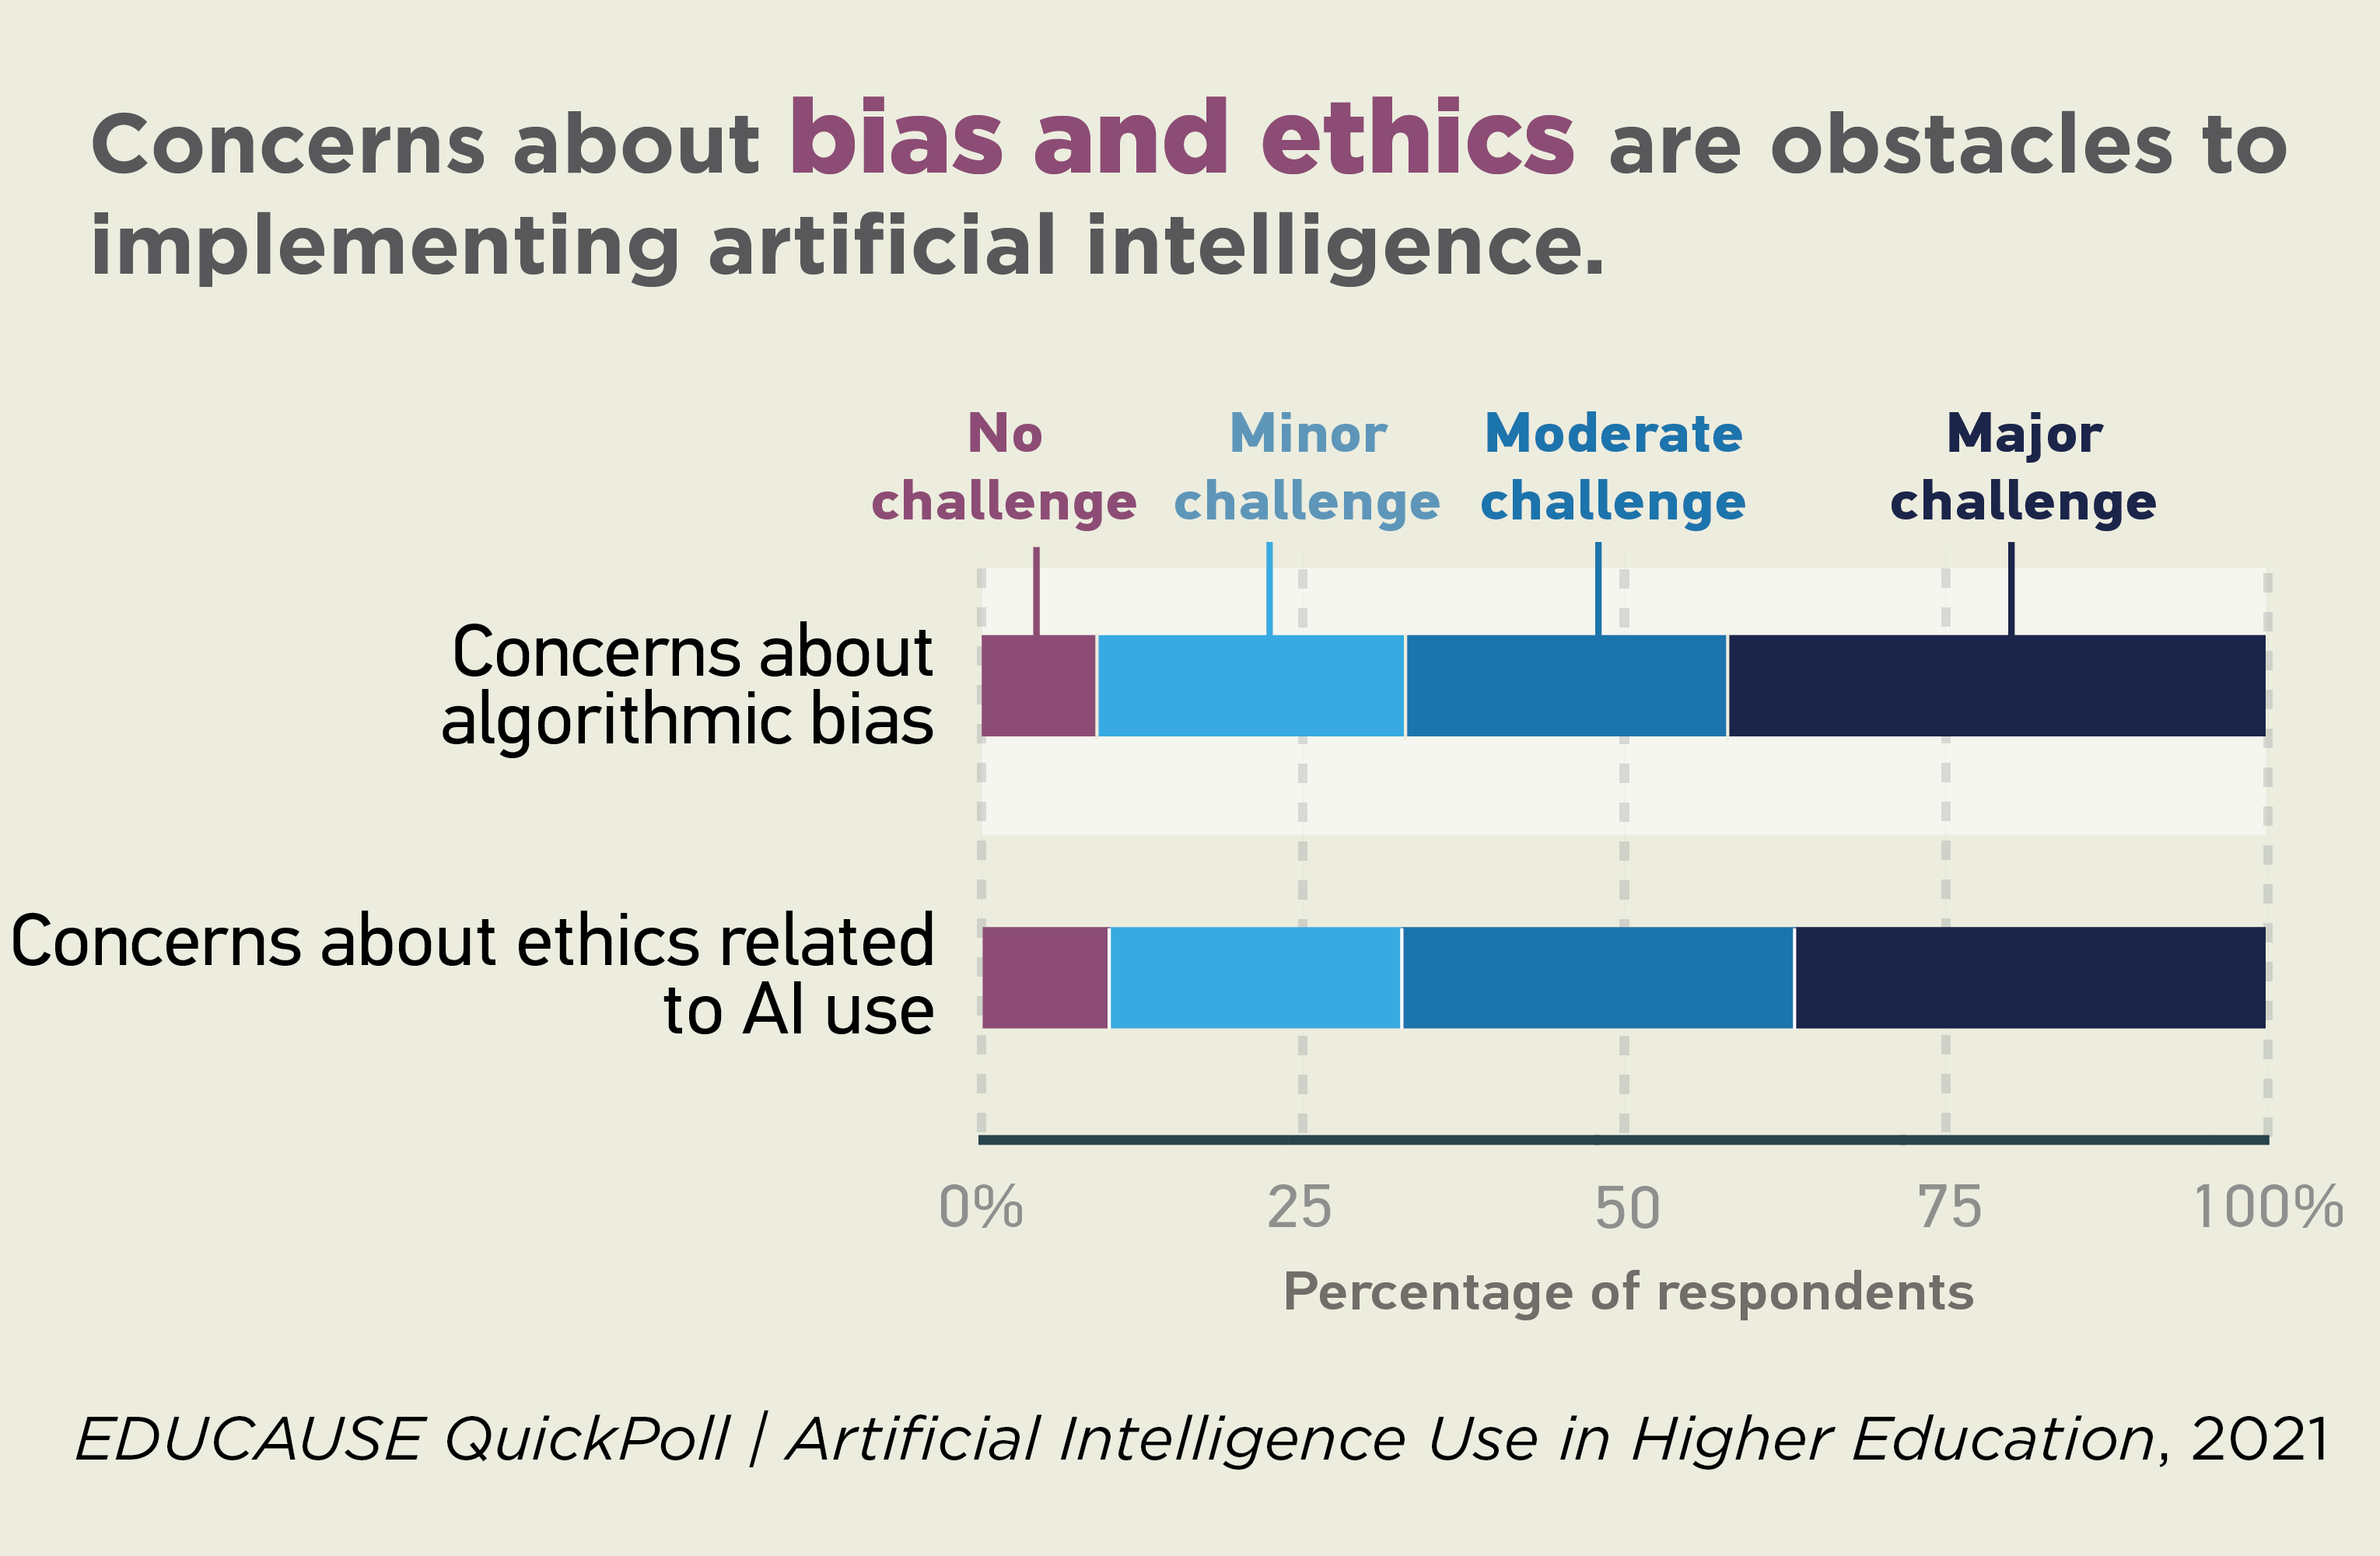 Concerns about bias and ethics are obstacles to implementing artificial intelligence. EDUCAUSE QuickPoll / Artificial Intelligence Use in Higher Education, 2021.